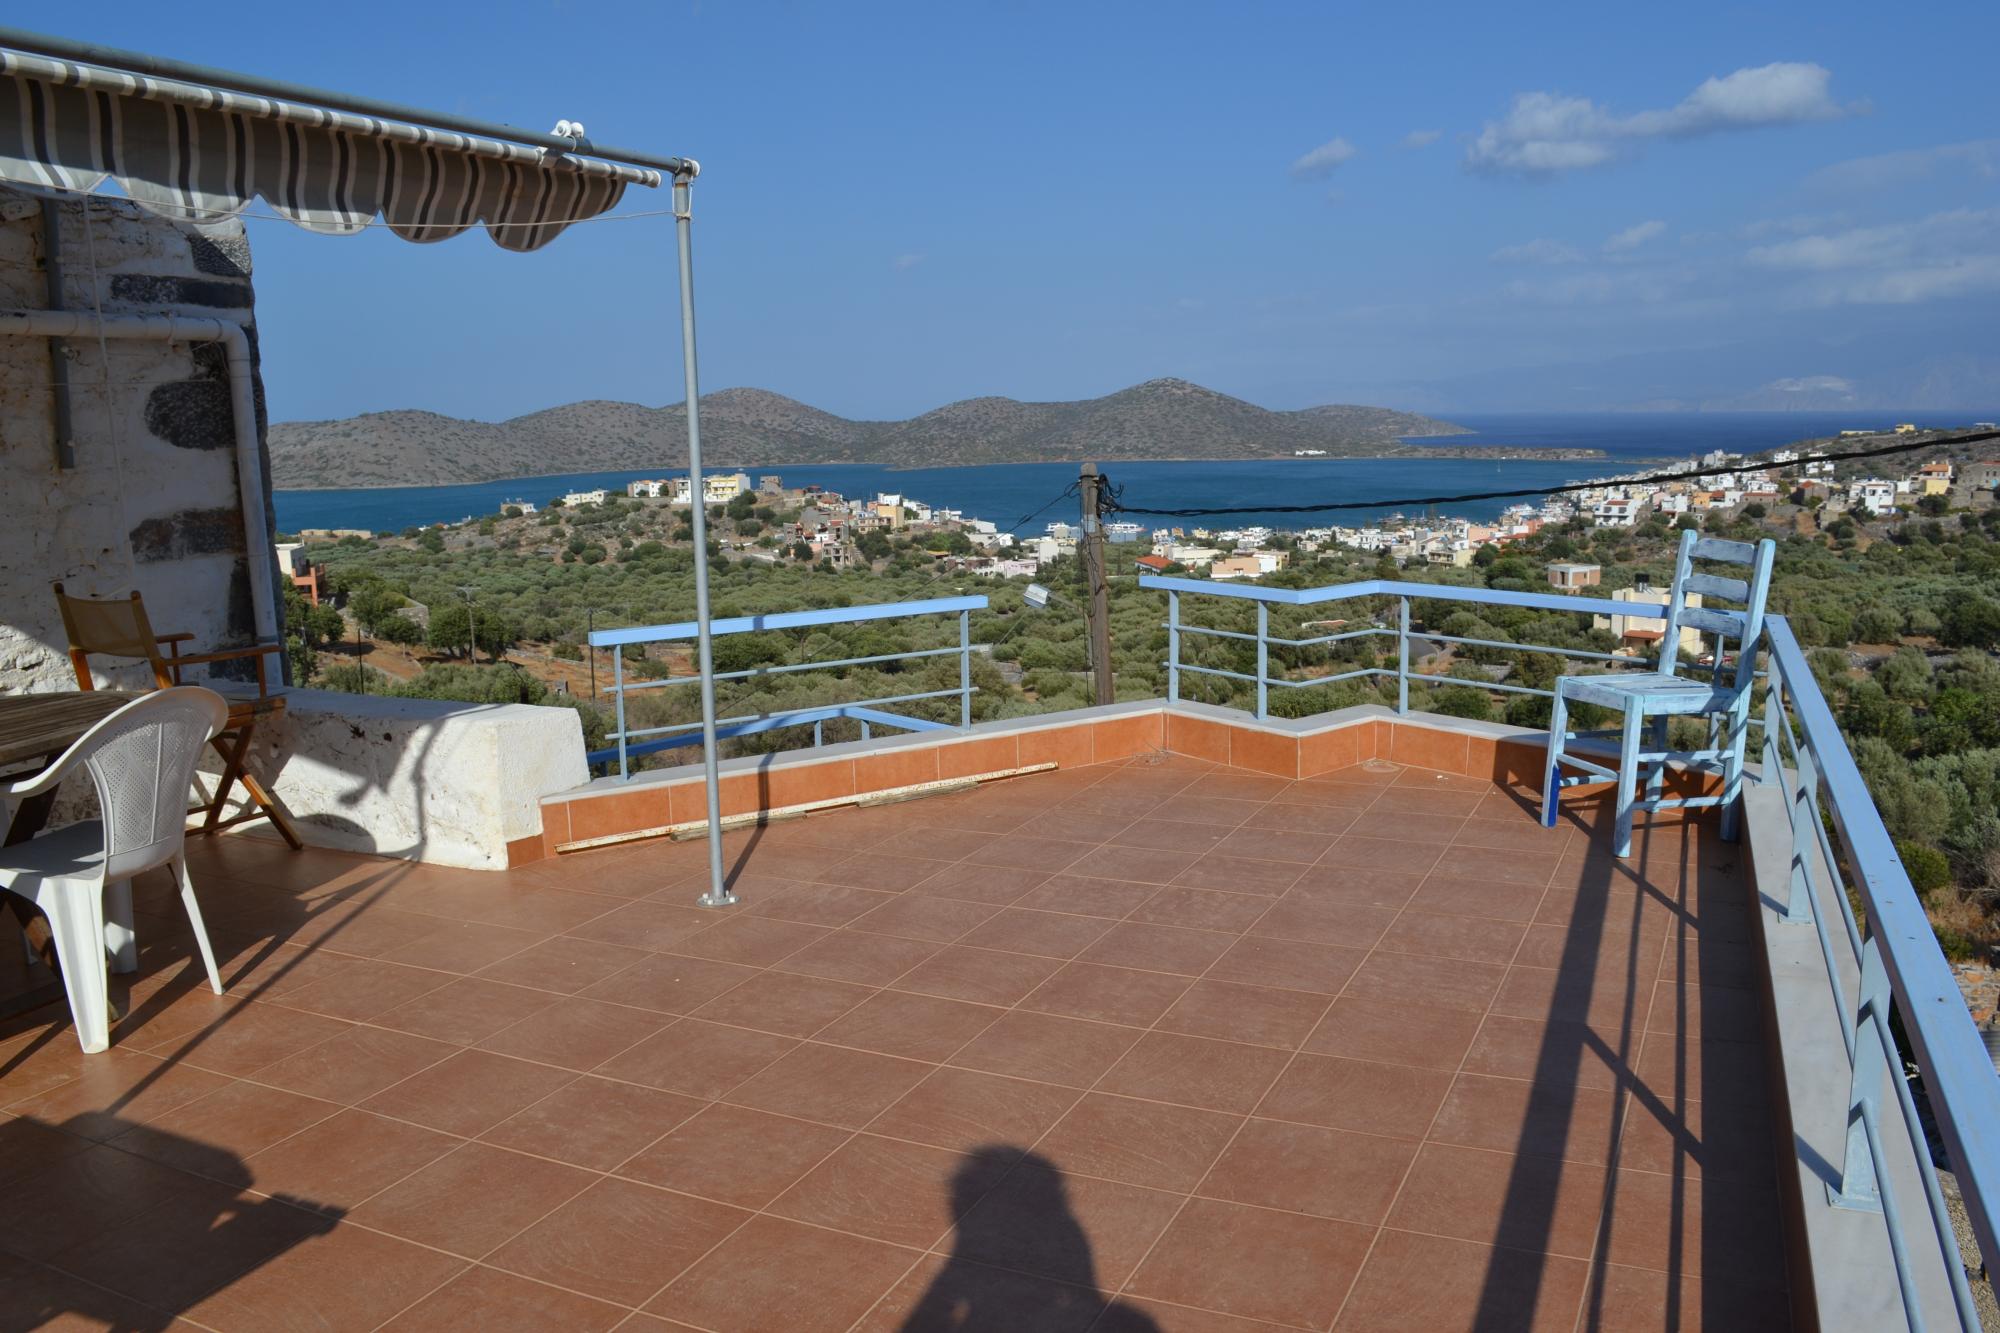 3 bed cottage with amazing sea views and nice courtyard.  Elounda.